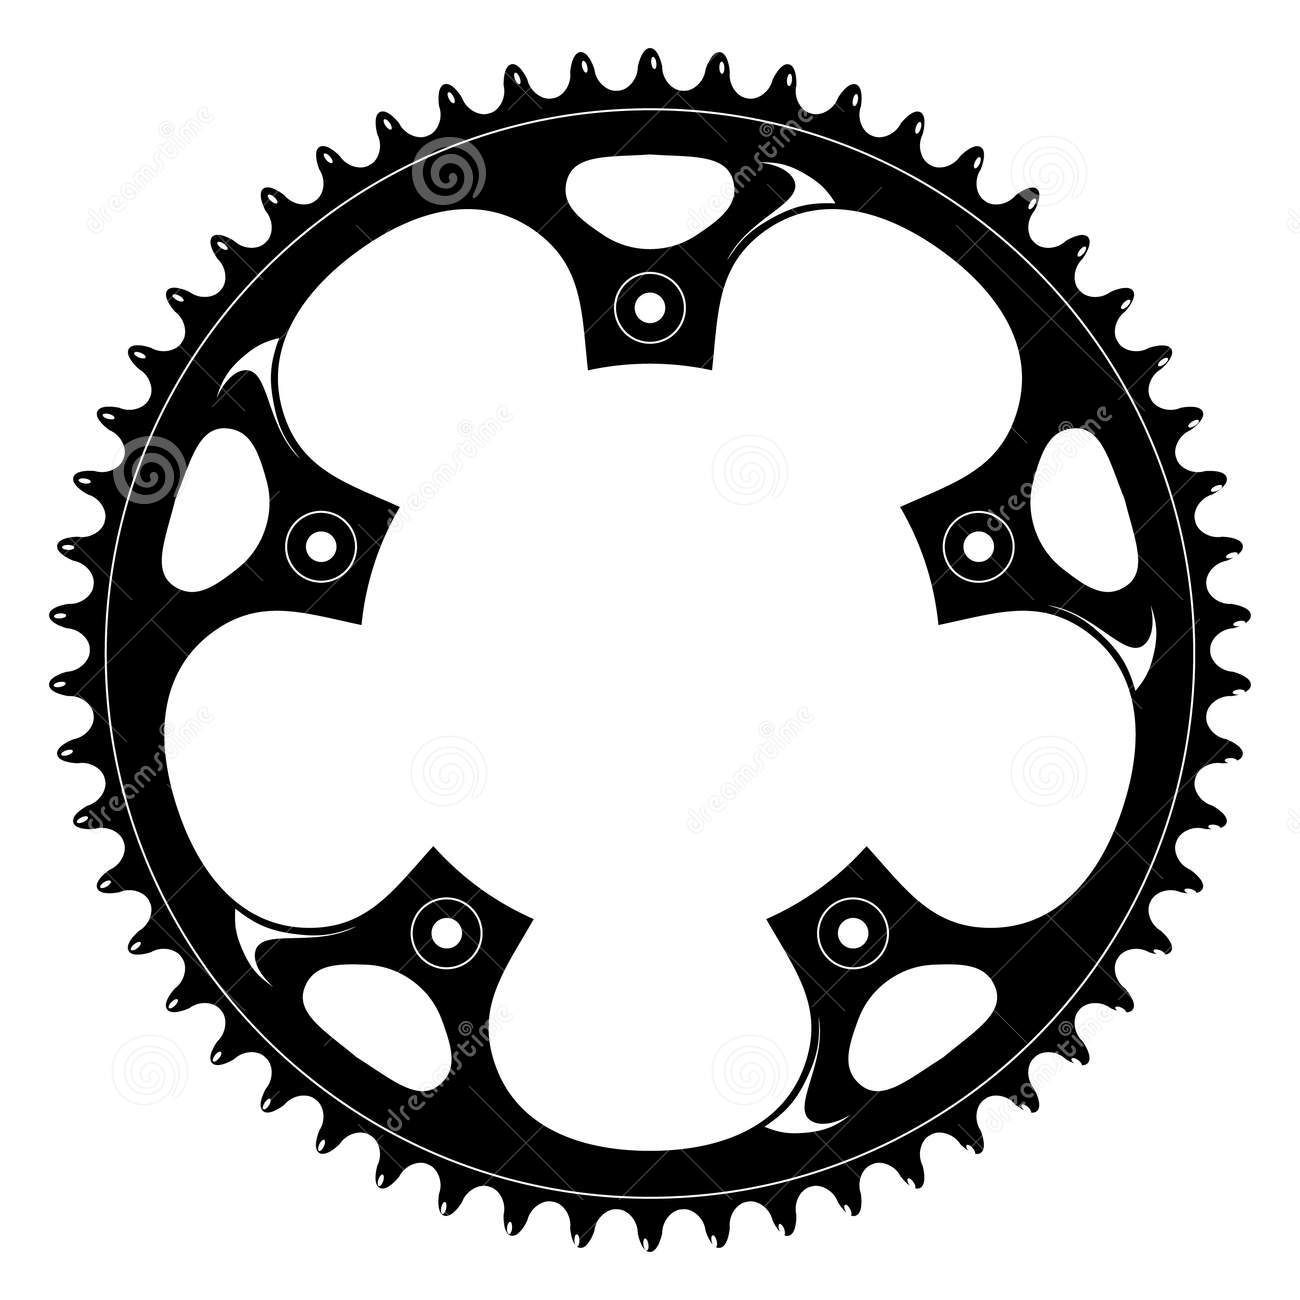 Gears clipart bicycle gear